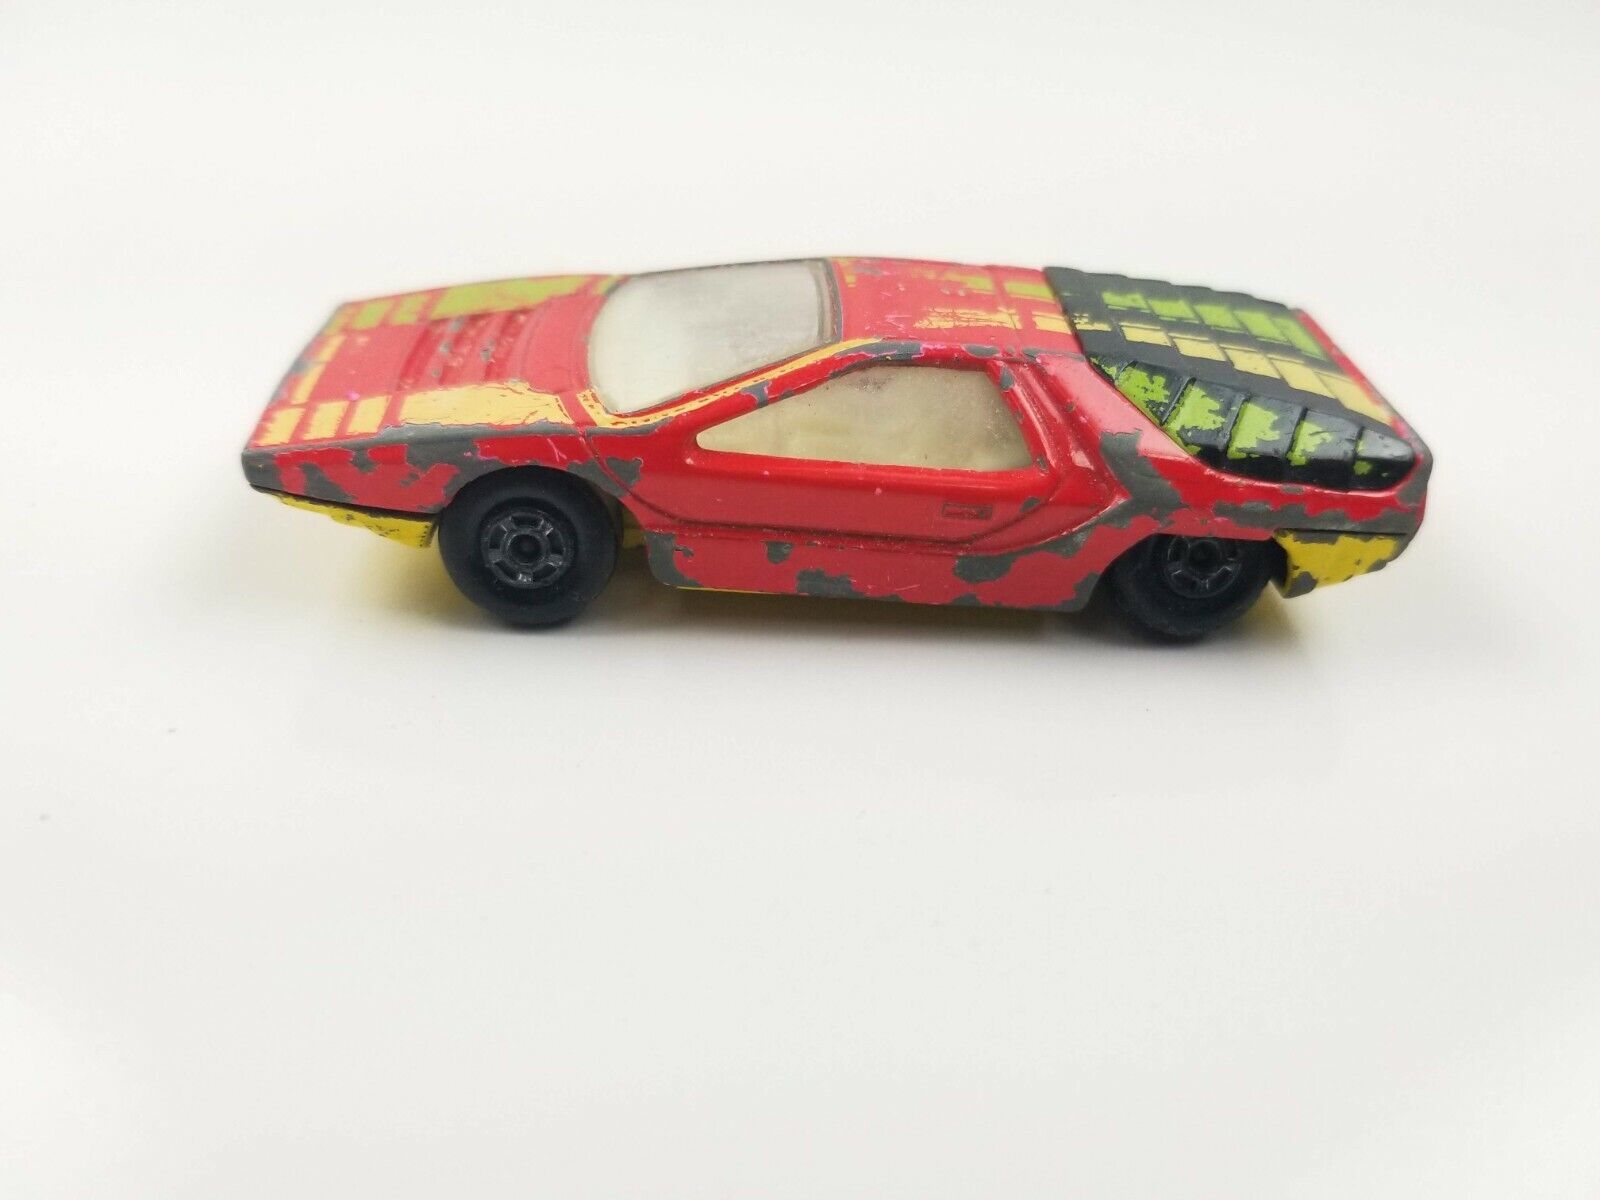 Primary image for Matchbox Alfa Carabo 1970 No 75 Lesney England Yellow Red Diecast Car